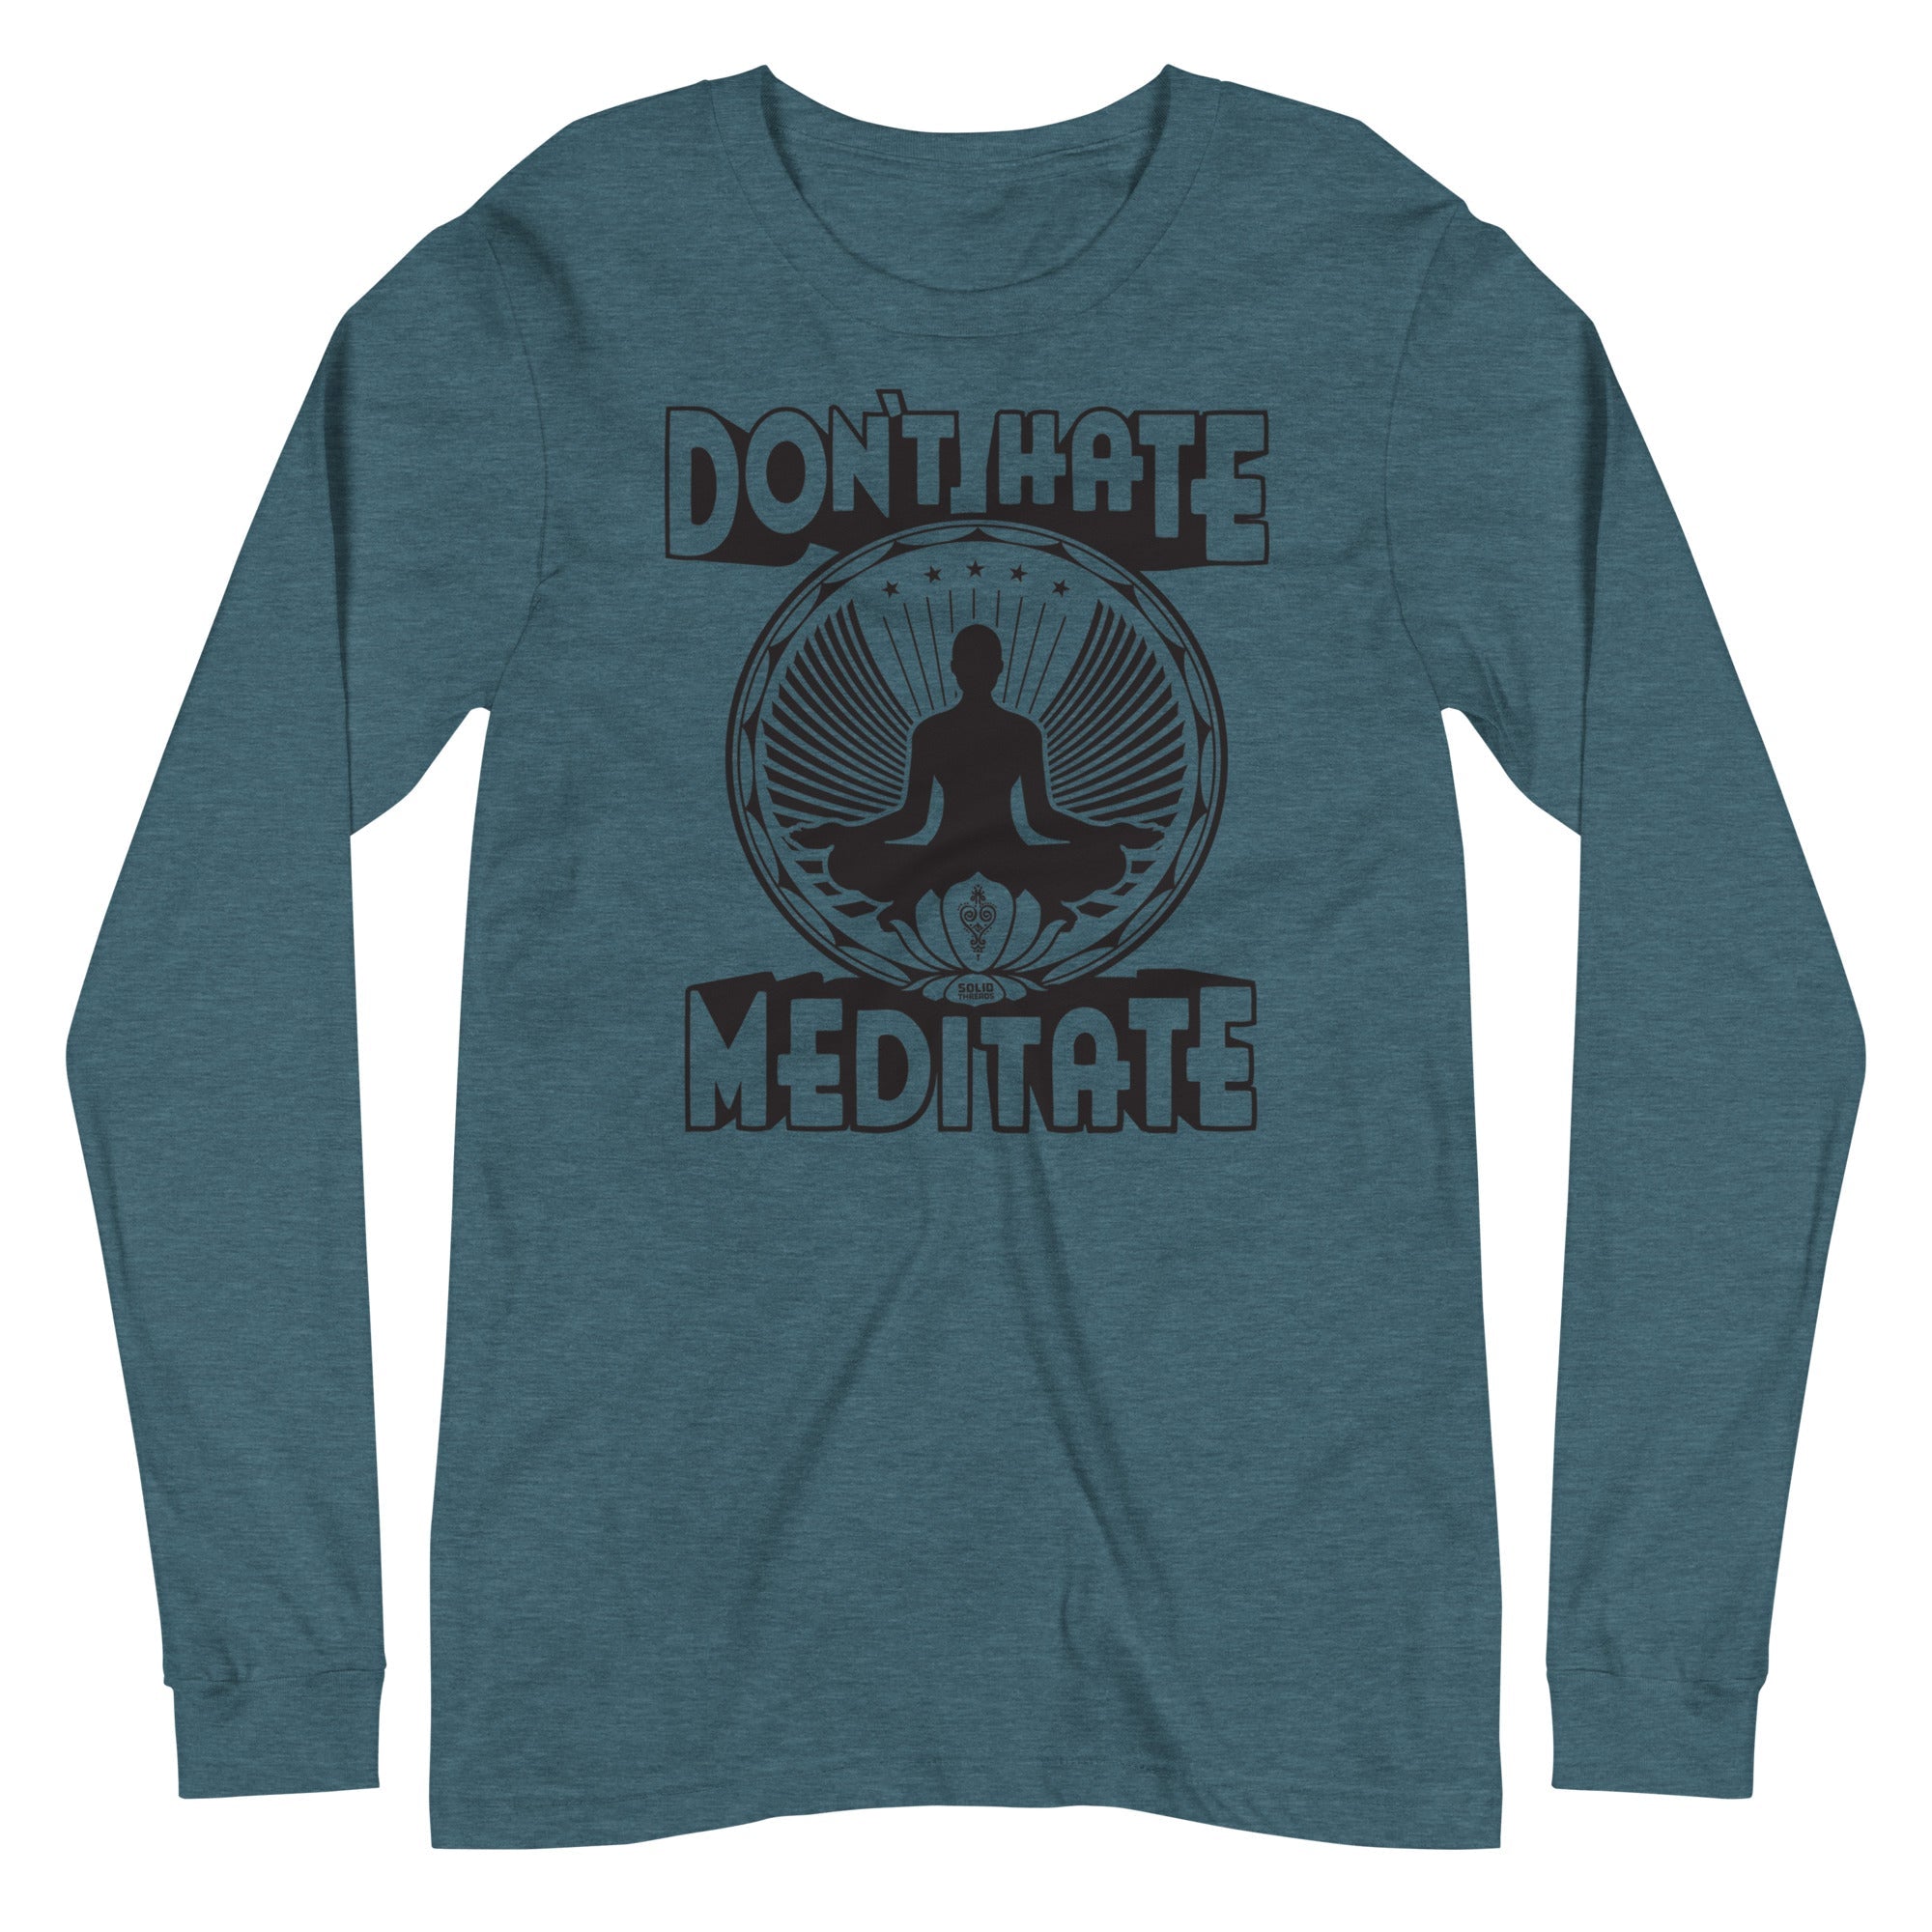 Don't Hate Meditate Vintage Graphic Long Sleeve Tee | Funny Mindfulness T-Shirt Heather Deep Teal - Solid Threads